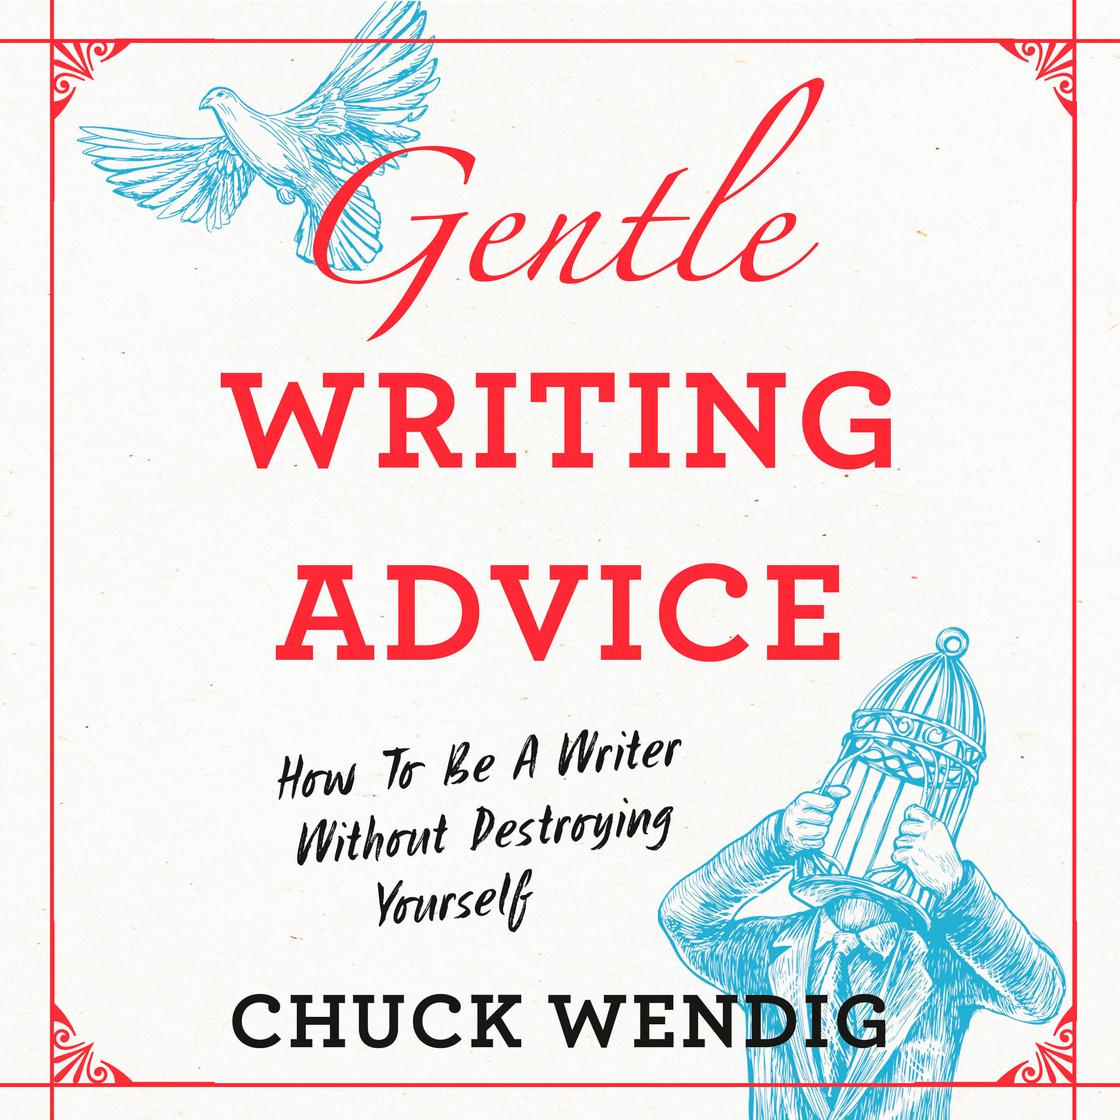 Cover image for Chuck Wendig's 'Gentle Writing Advice'